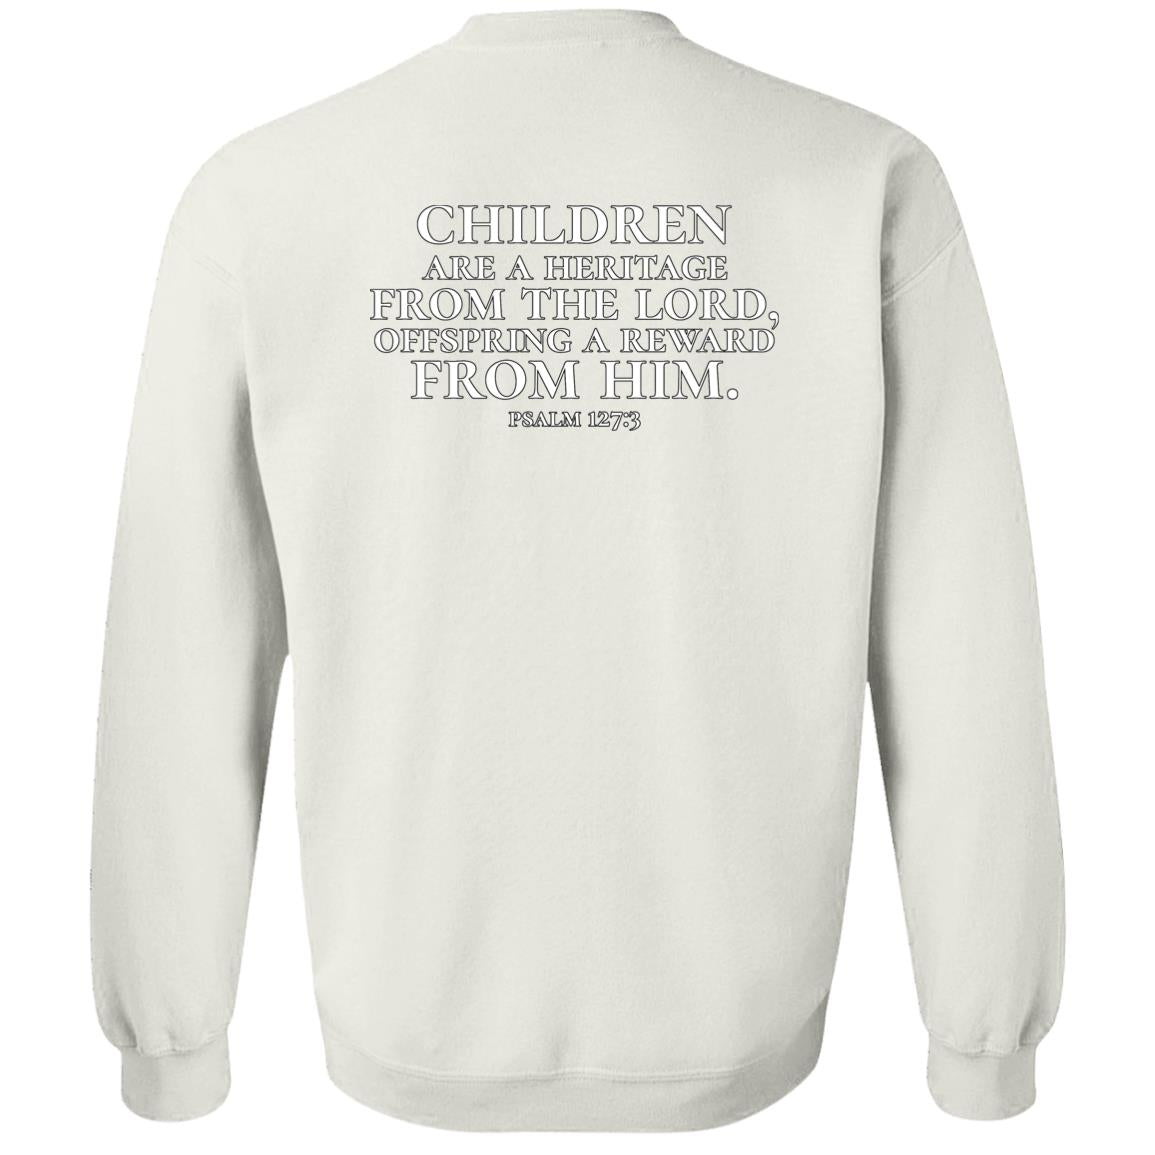 Why We Protect Our Children (Unisex Sweatshirt)